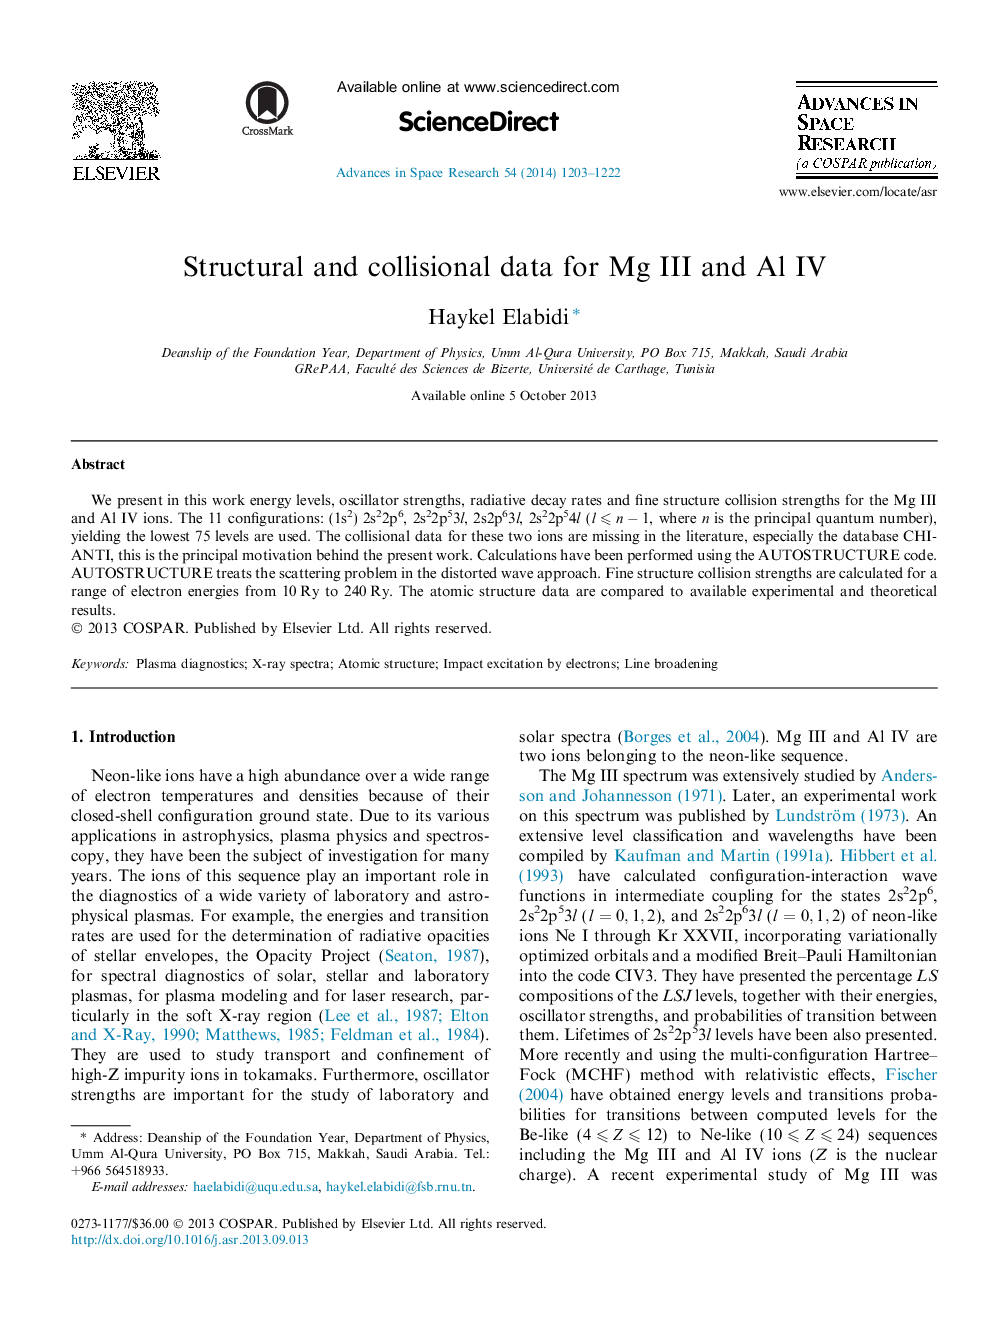 Structural and collisional data for Mg III and Al IV